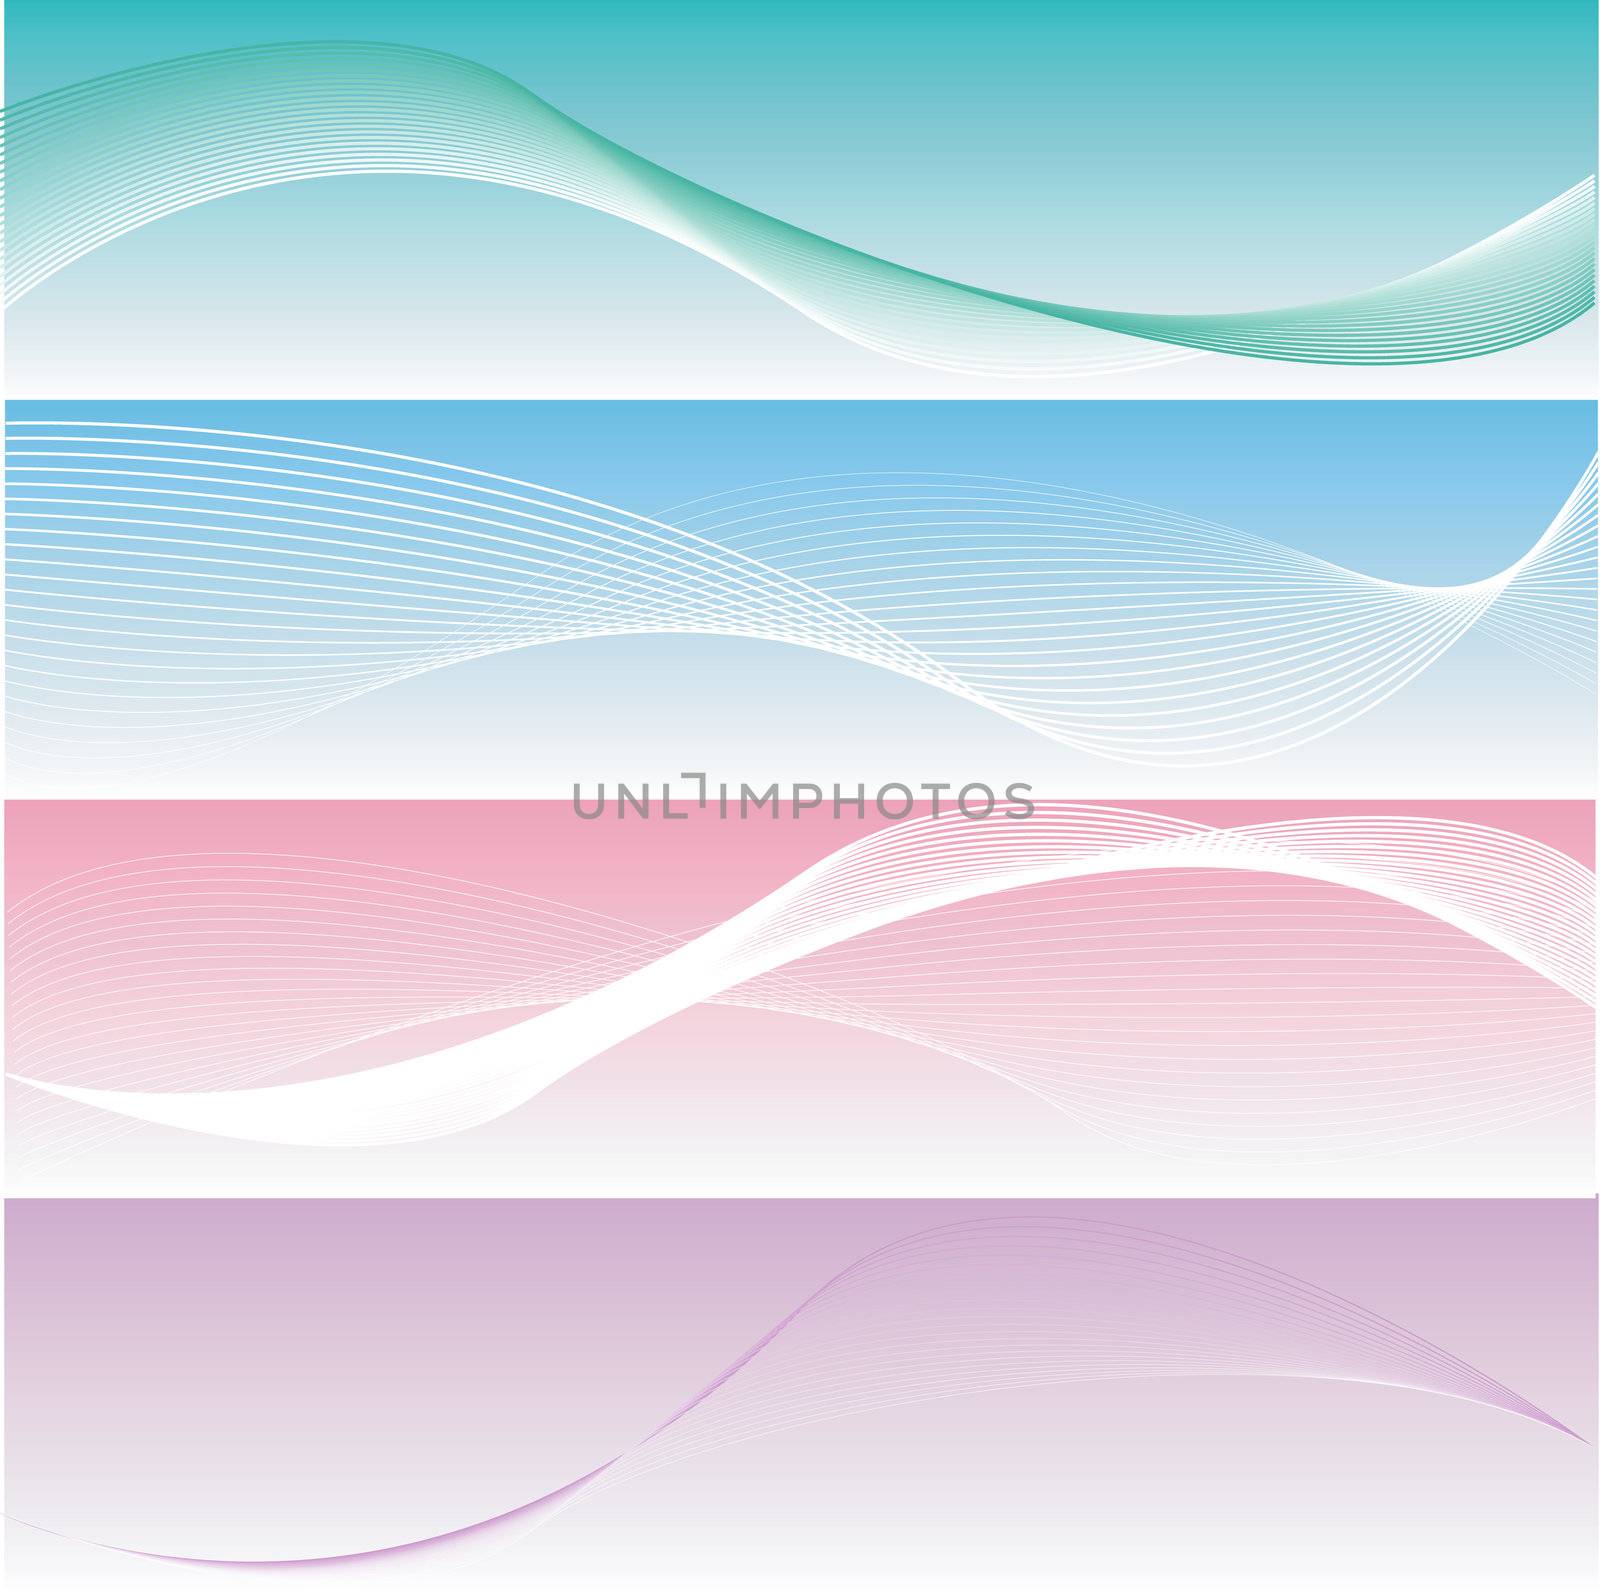 four different elegant and smooth banners or web site headers, also suitable as business cards